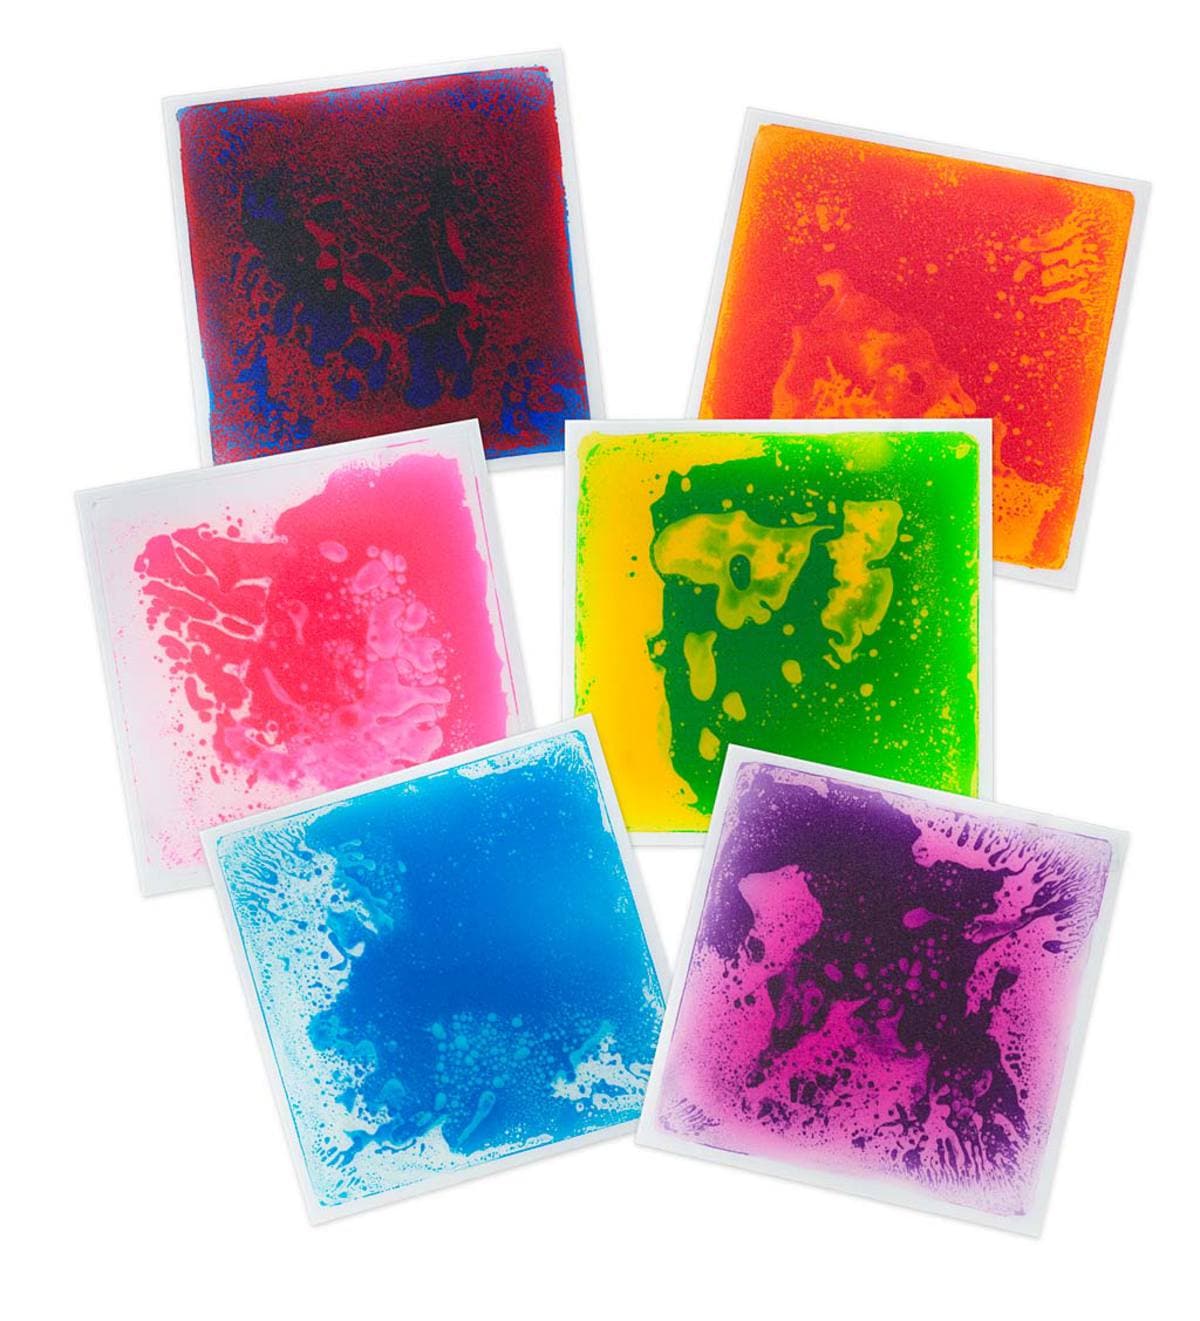 Large Sensory Liquid Tiles Pack of 6, The Large Sensory Liquid Tiles are a wonderful visual and tactile light up experience, that really does encourage you to move around and explore the surfaces. The Large Sensory Liquid Tiles contain flowing colours that swirl around as you move about on them. They will withstand jumping on and strenuous use by children and adults as well as the weight of wheelchairs. Can also be used on a table top of any flat surface. Simply Apply a little pressure to create a dramatic 